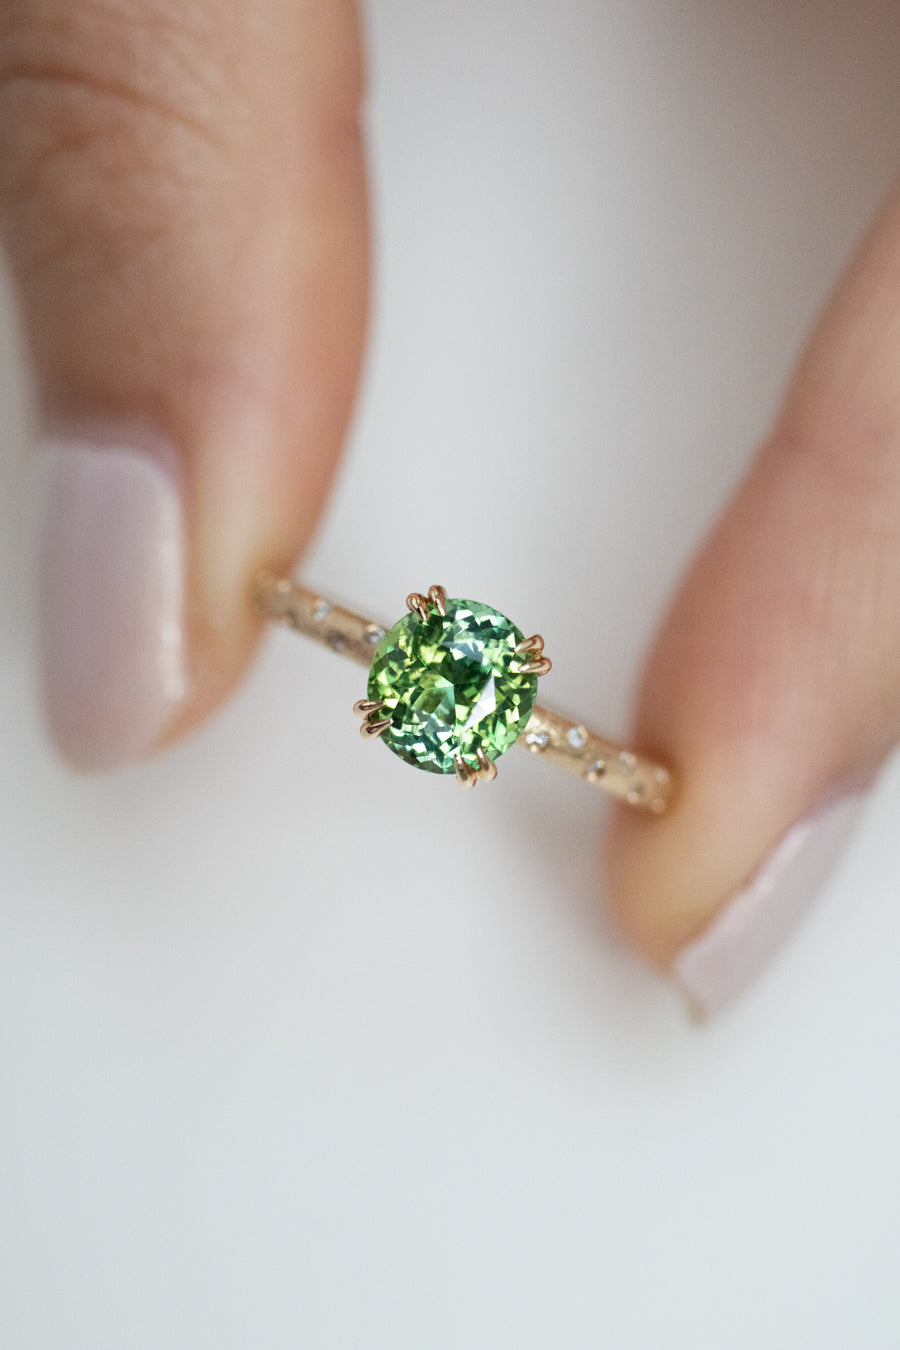 1.37carat Oval Forest Green Tourmaline (With Certificate) & 0.042carat Diamonds 18K Yellow Gold Ring